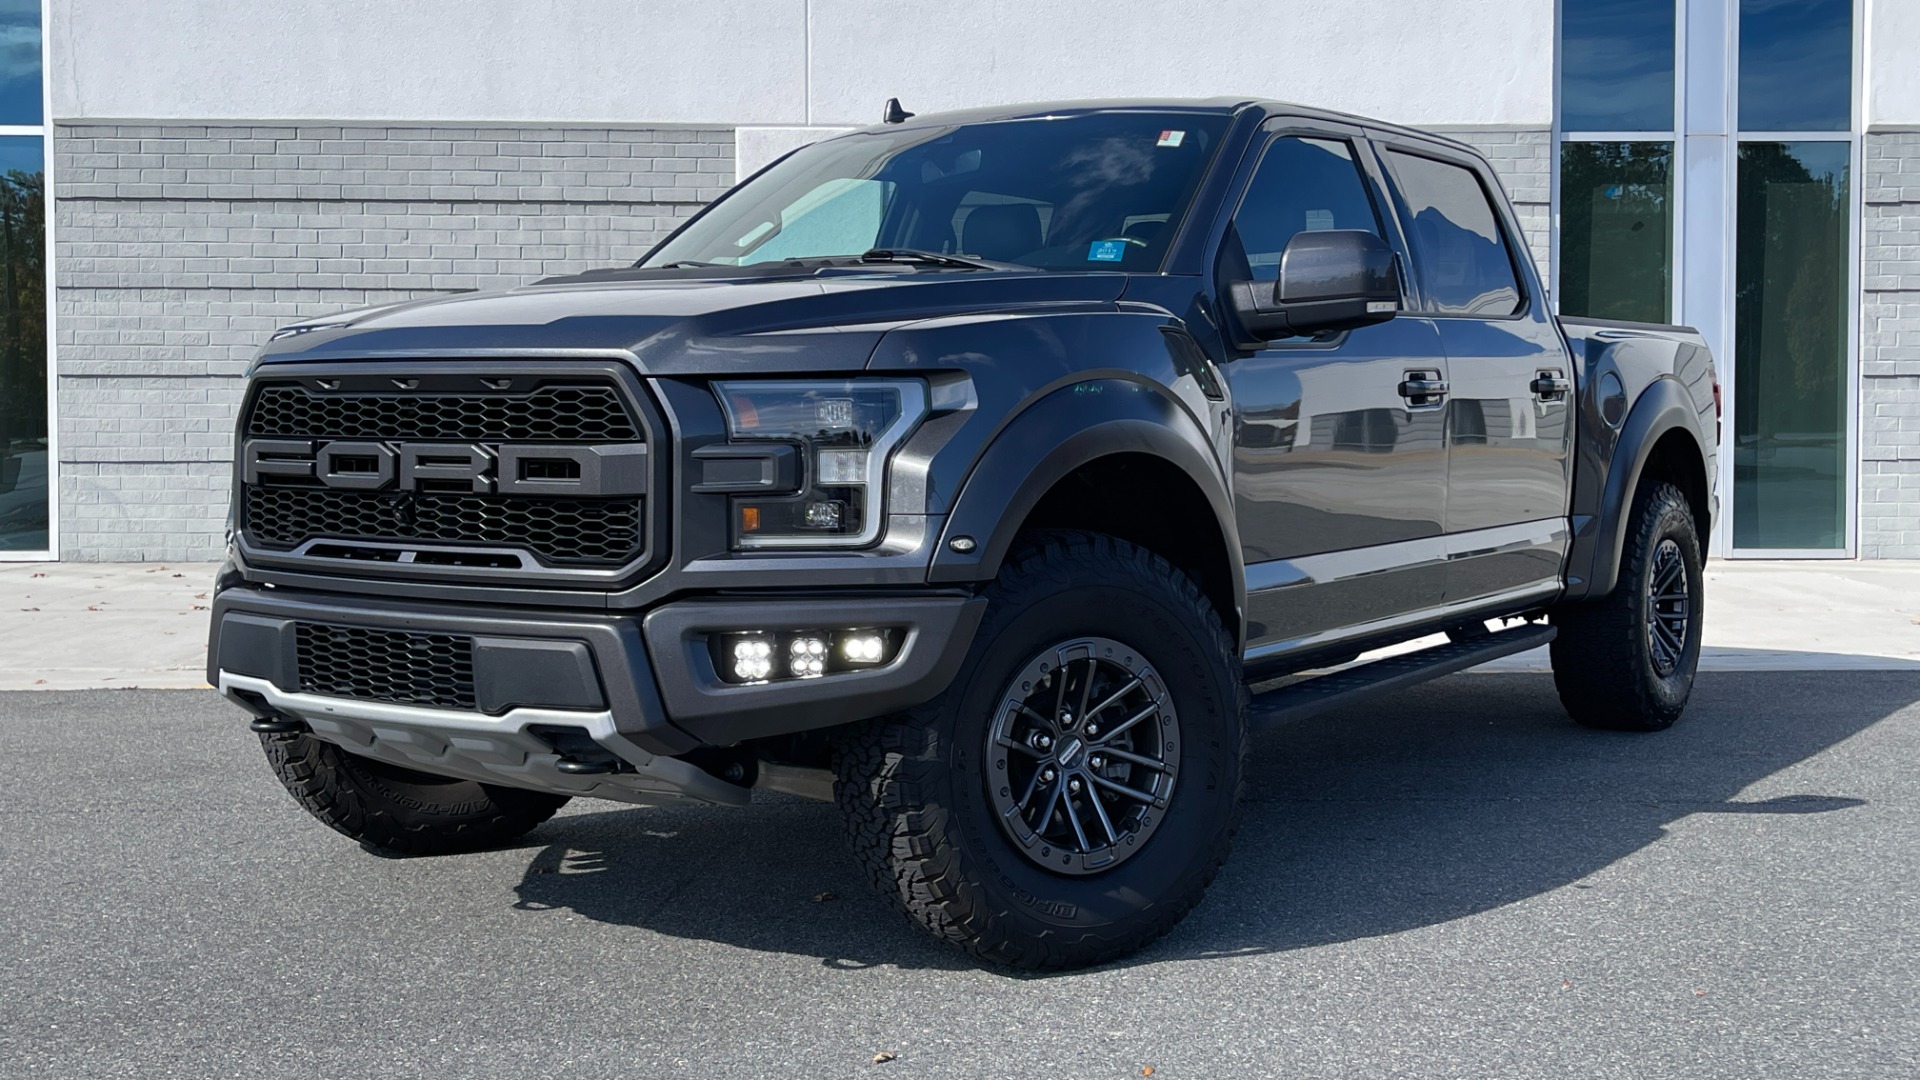 Used 2019 Ford F-150 RAPTOR / 802A PACKAGE / LIGHT PODS / CARBON FIBER / PANORAMIC ROOF for sale Sold at Formula Imports in Charlotte NC 28227 52